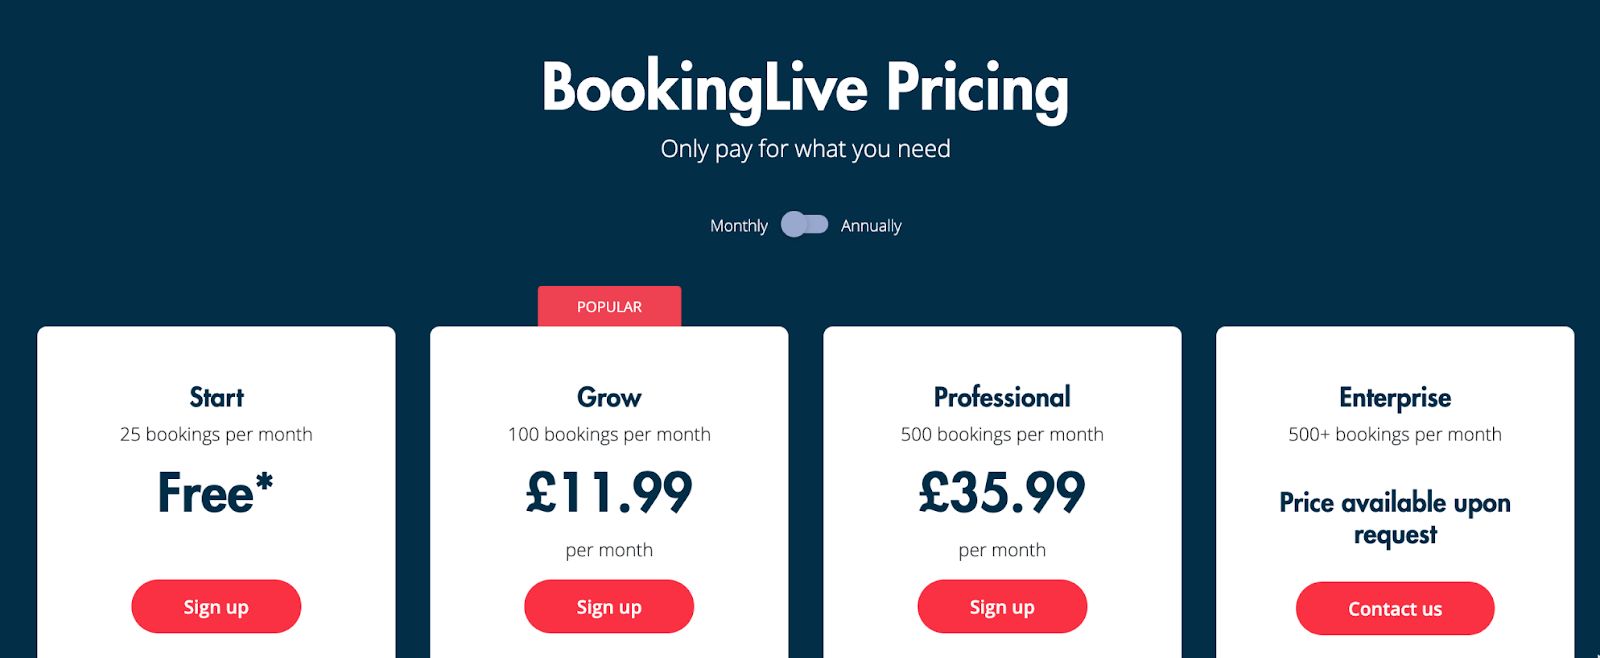 Bookinglive pricing, from £11.99 per month